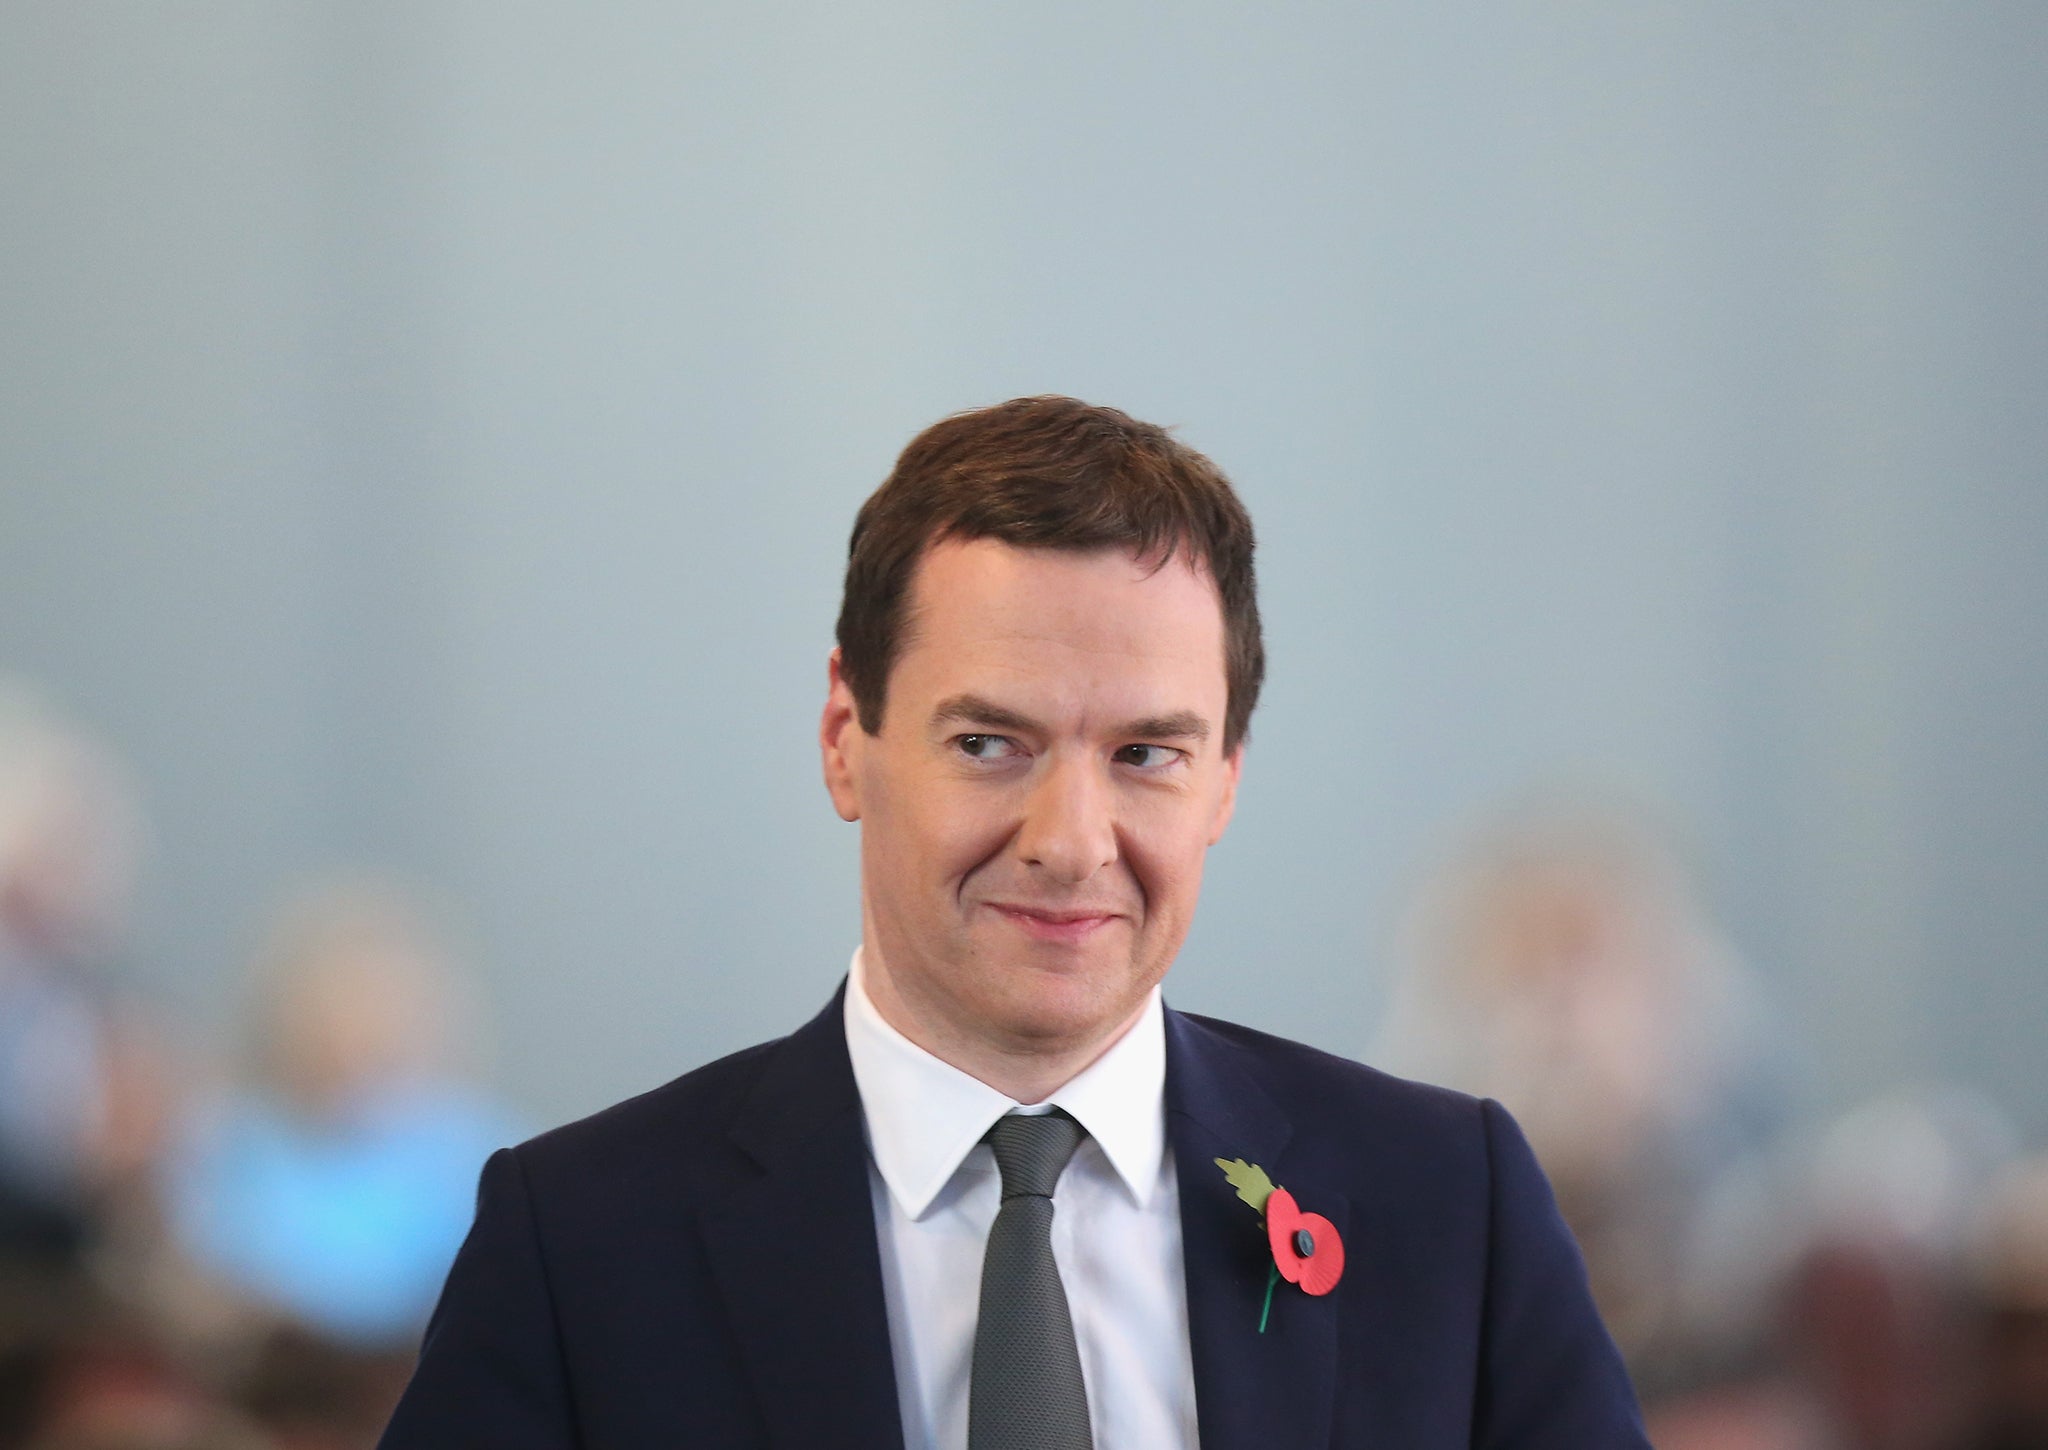 George Osborne attends the 'Day of German Indsutry' annual gathering on November 3, 2015 in Berlin, Germany